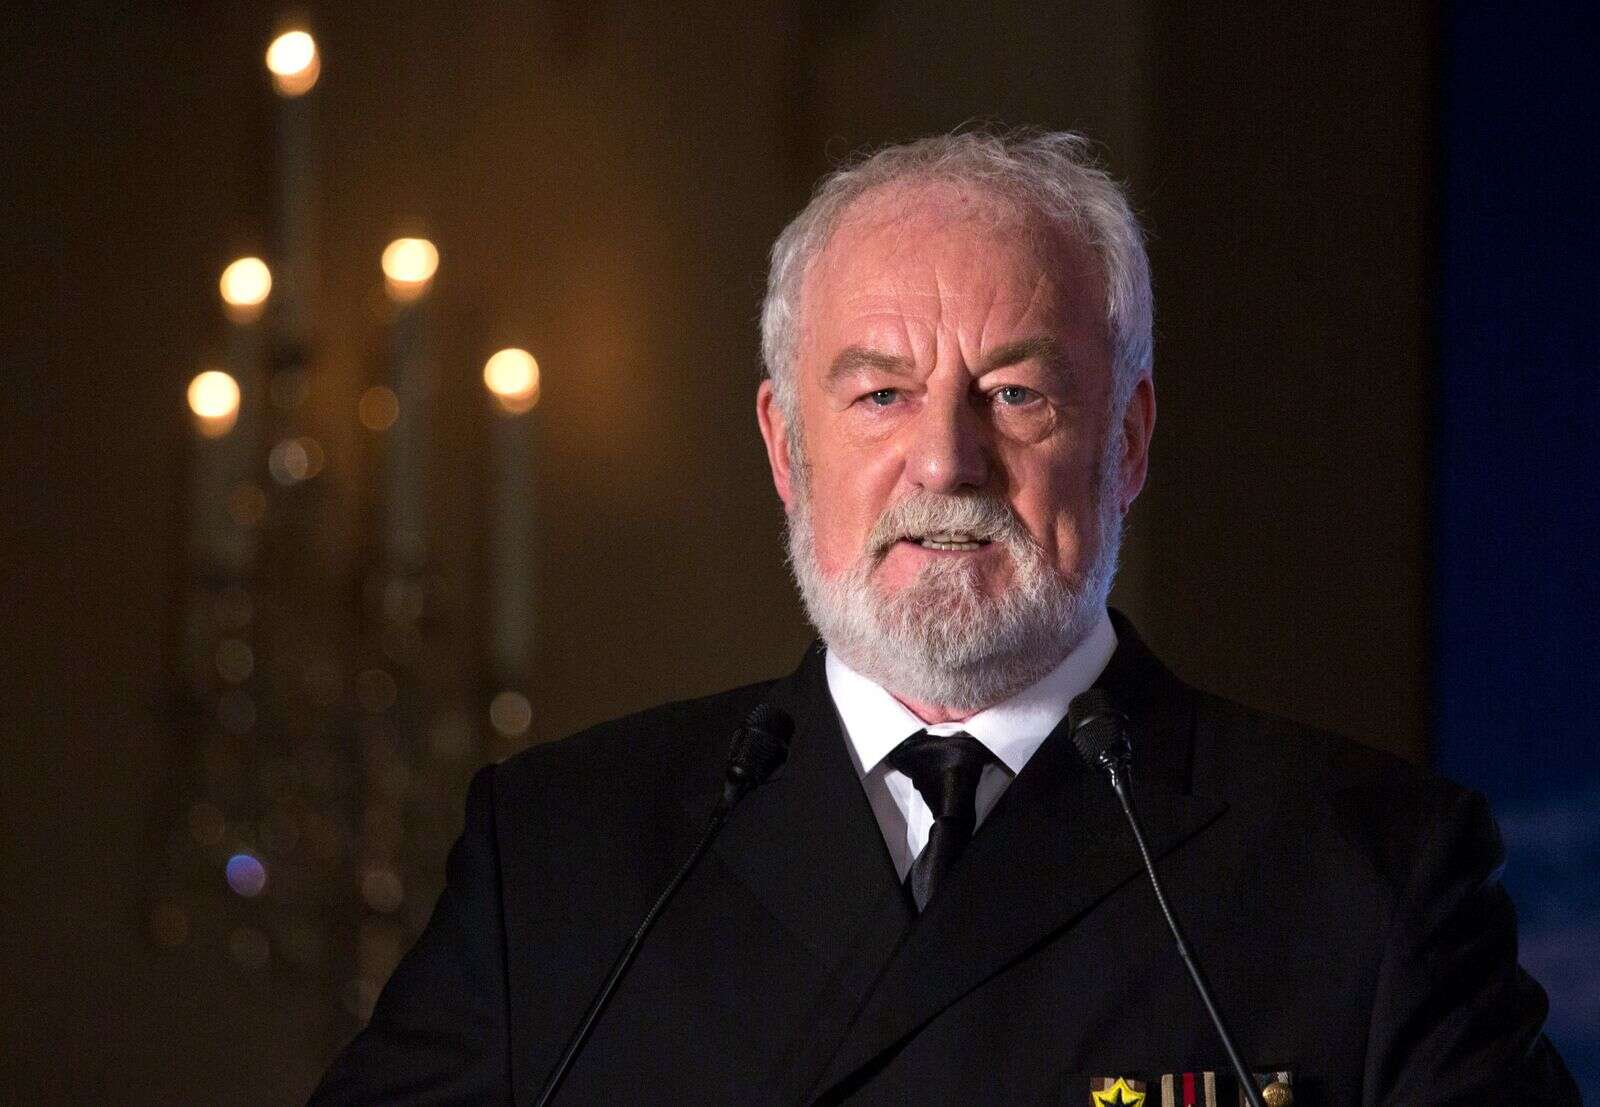 'titanic', 'lord of the rings' actor bernard hill dies at 79